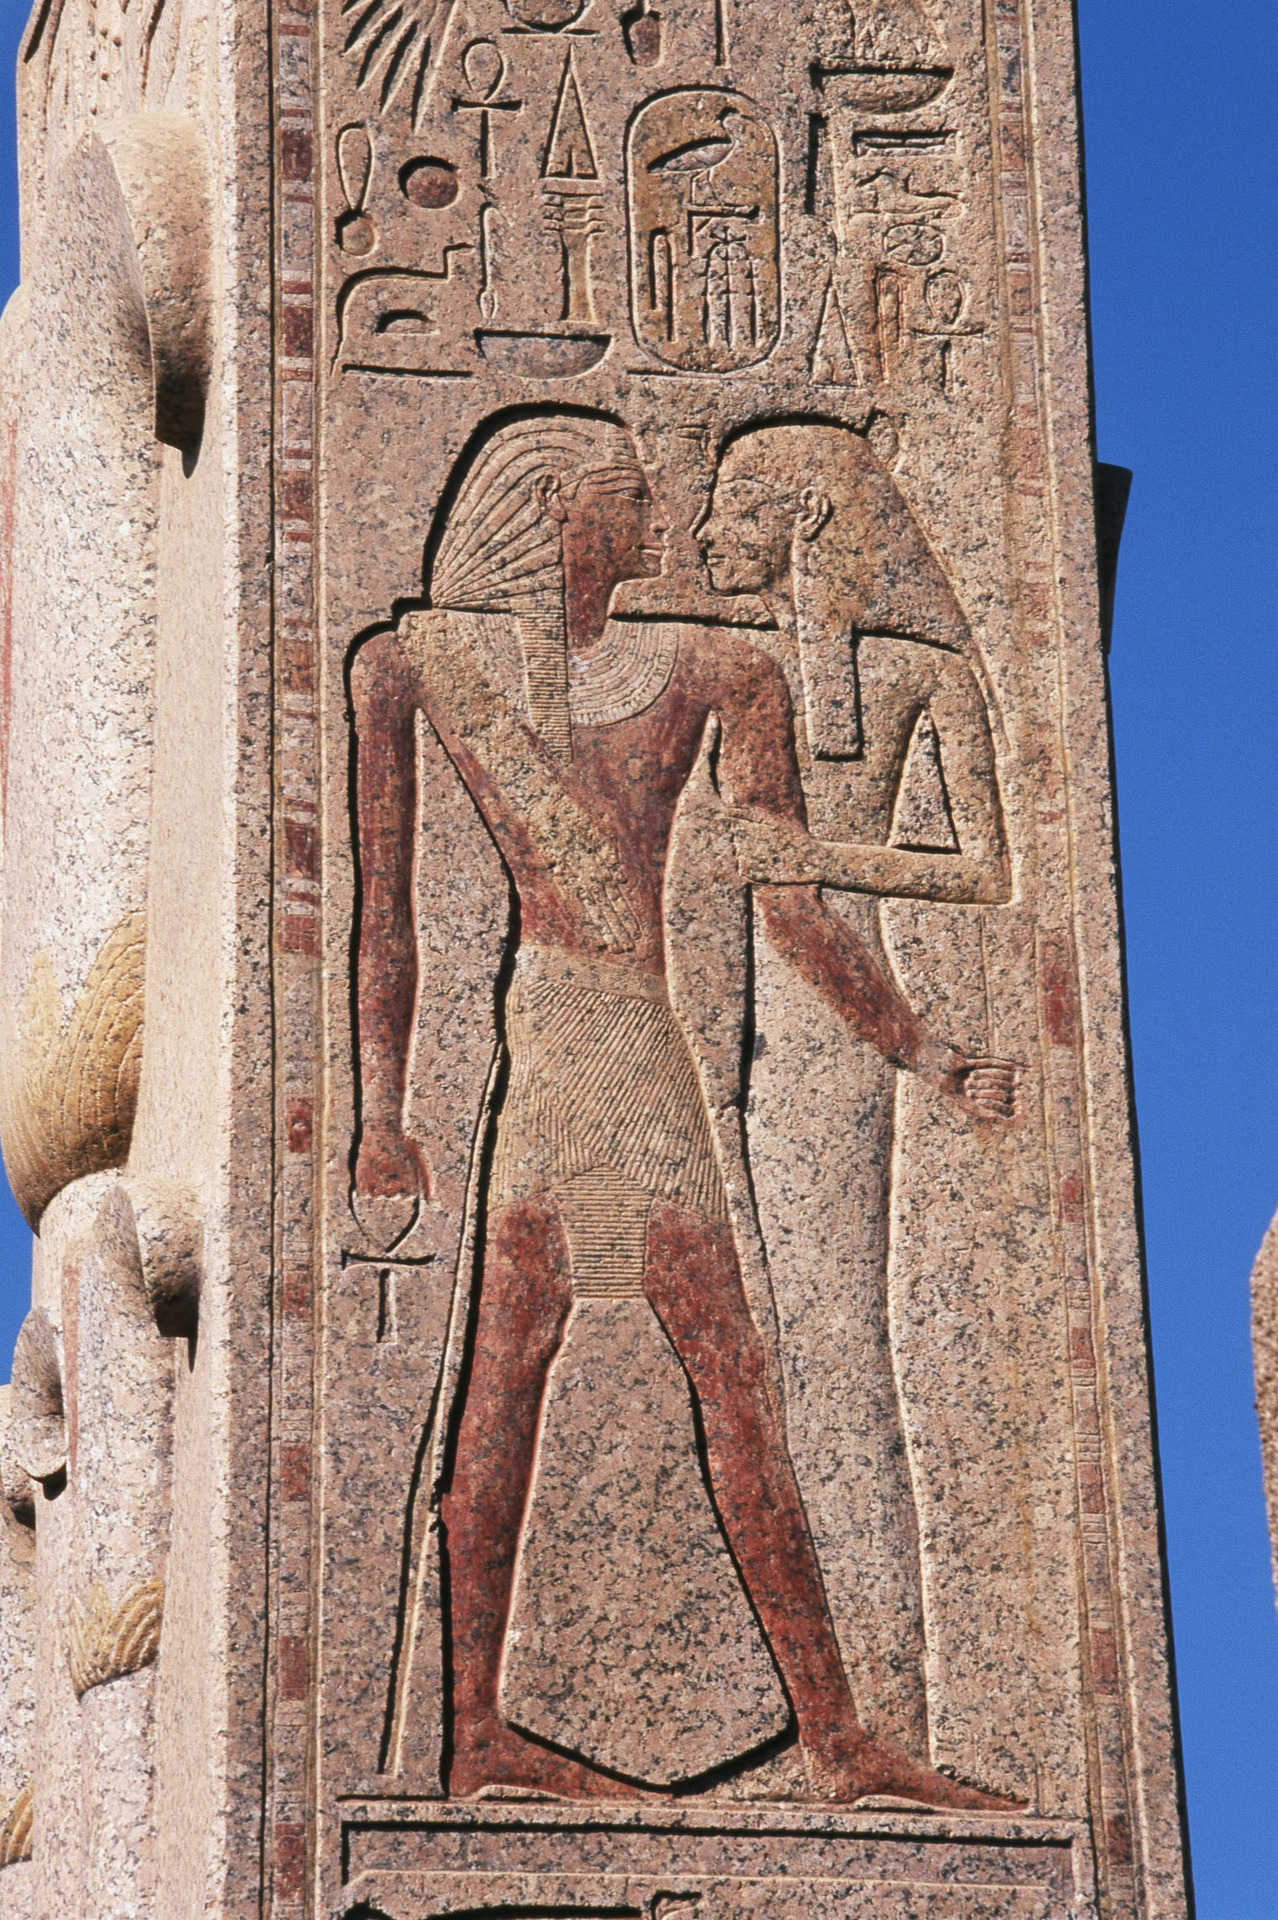 King Thutmose III embraced by the goddess Mut, detail from the pillar of Upper Egypt, one of the two granite heraldic pillars erected by Thutmose III in the front of his Hall of Annals at Karnak.